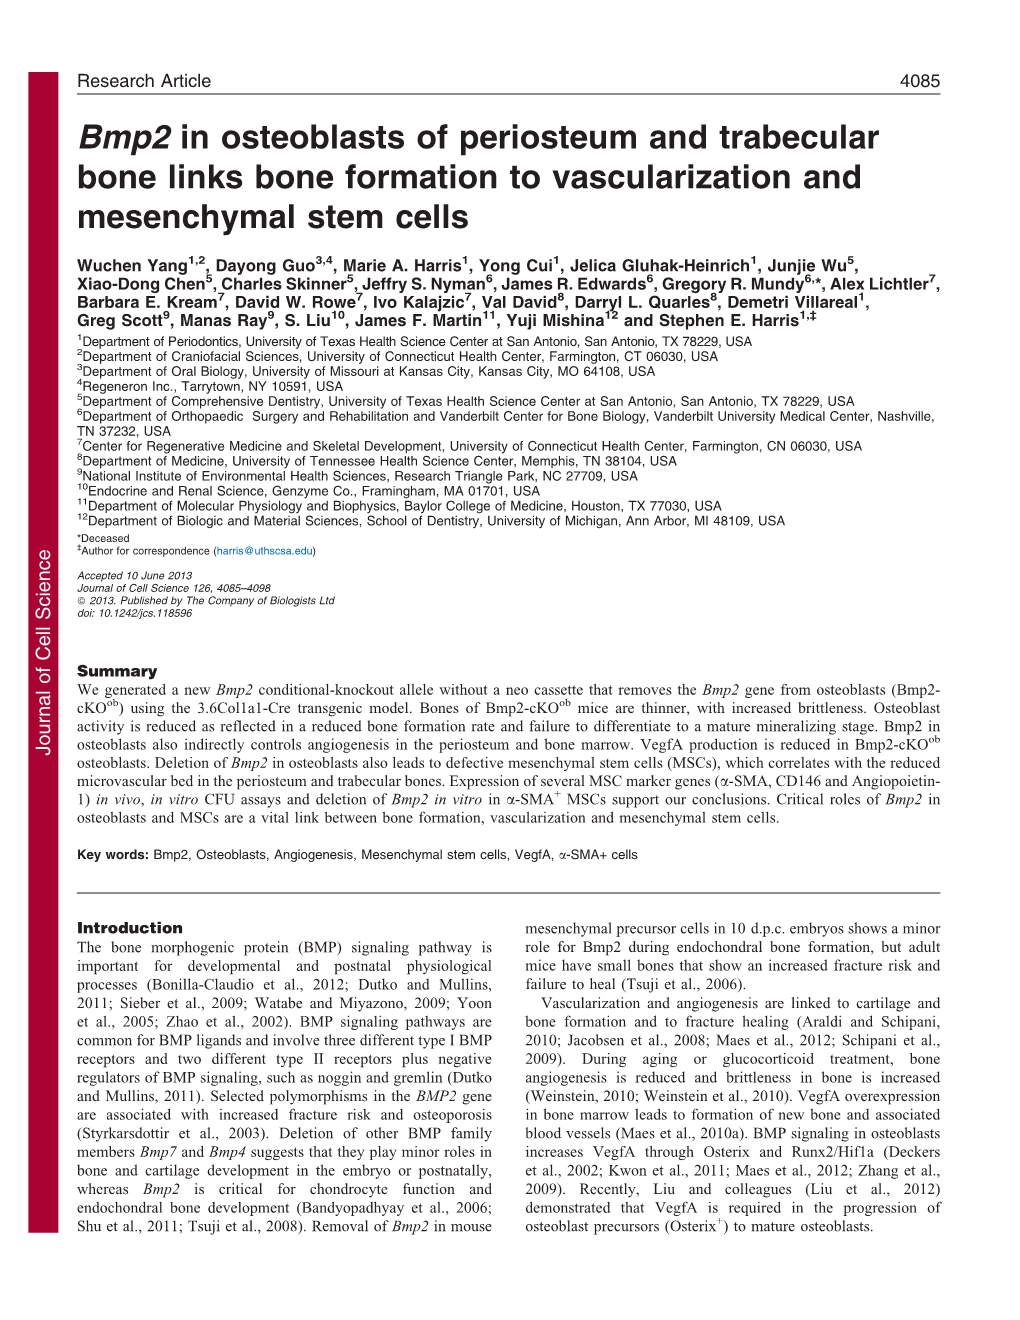 Bmp2 in Osteoblasts of Periosteum and Trabecular Bone Links Bone